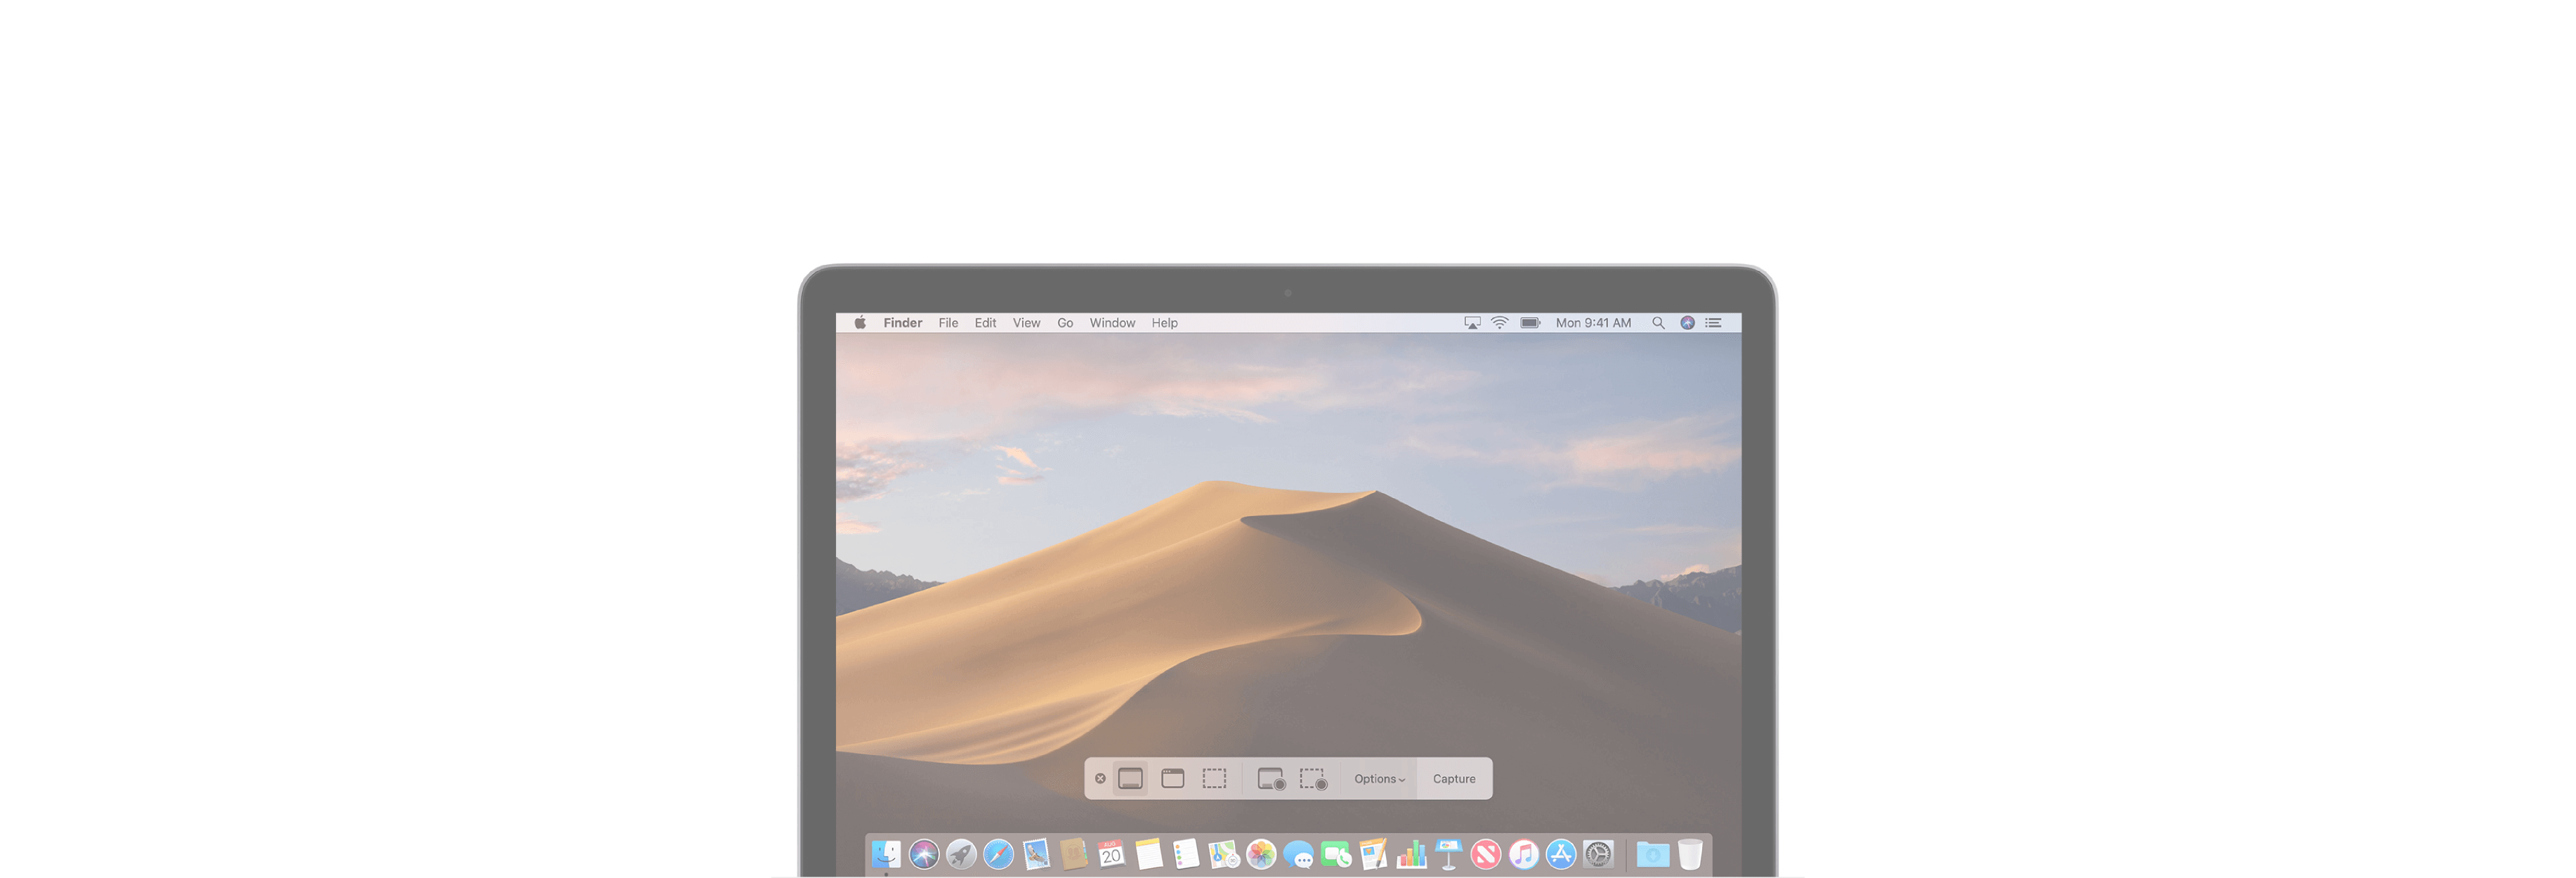 How to take screenshots and record your screen in macOS Mojave